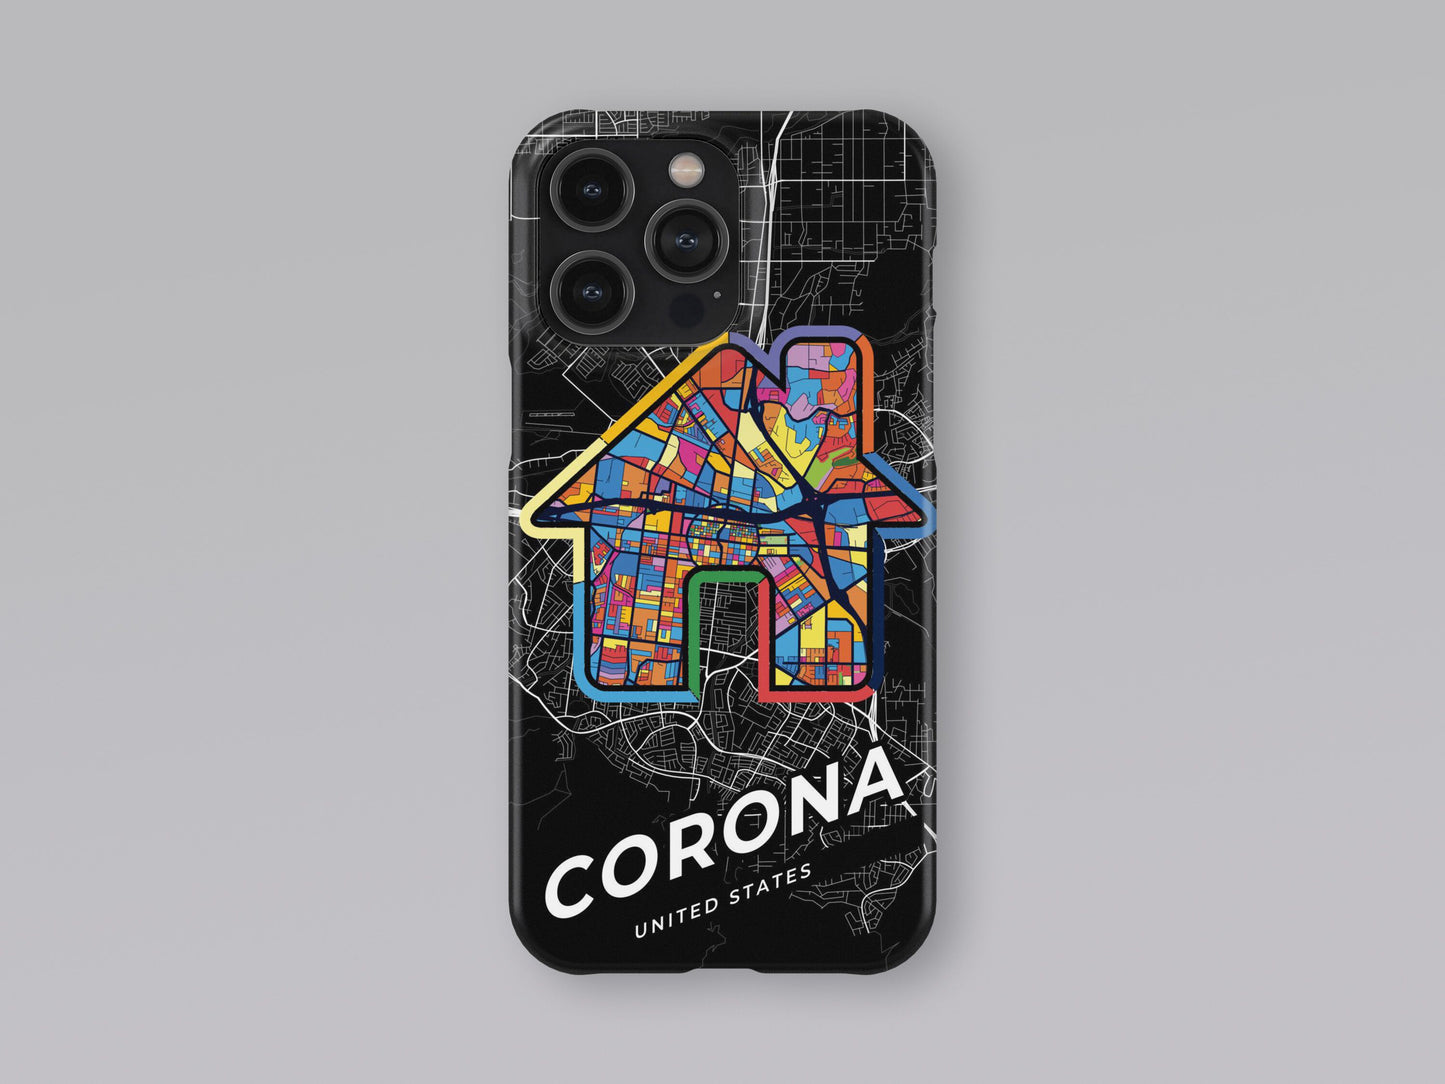 Corona California slim phone case with colorful icon. Birthday, wedding or housewarming gift. Couple match cases. 3